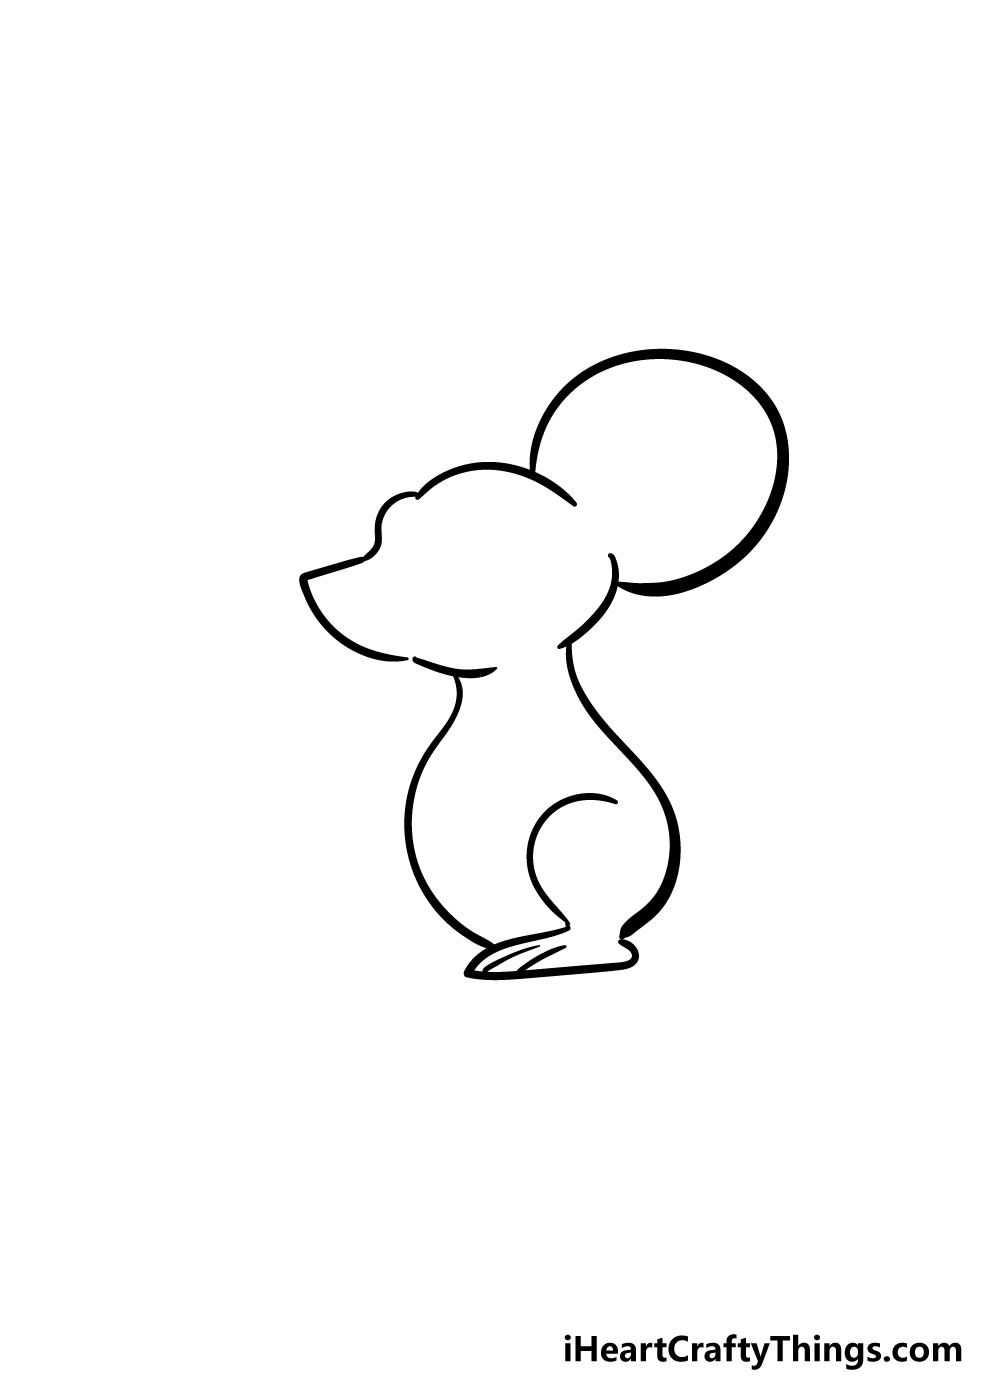 mouse drawing step 3